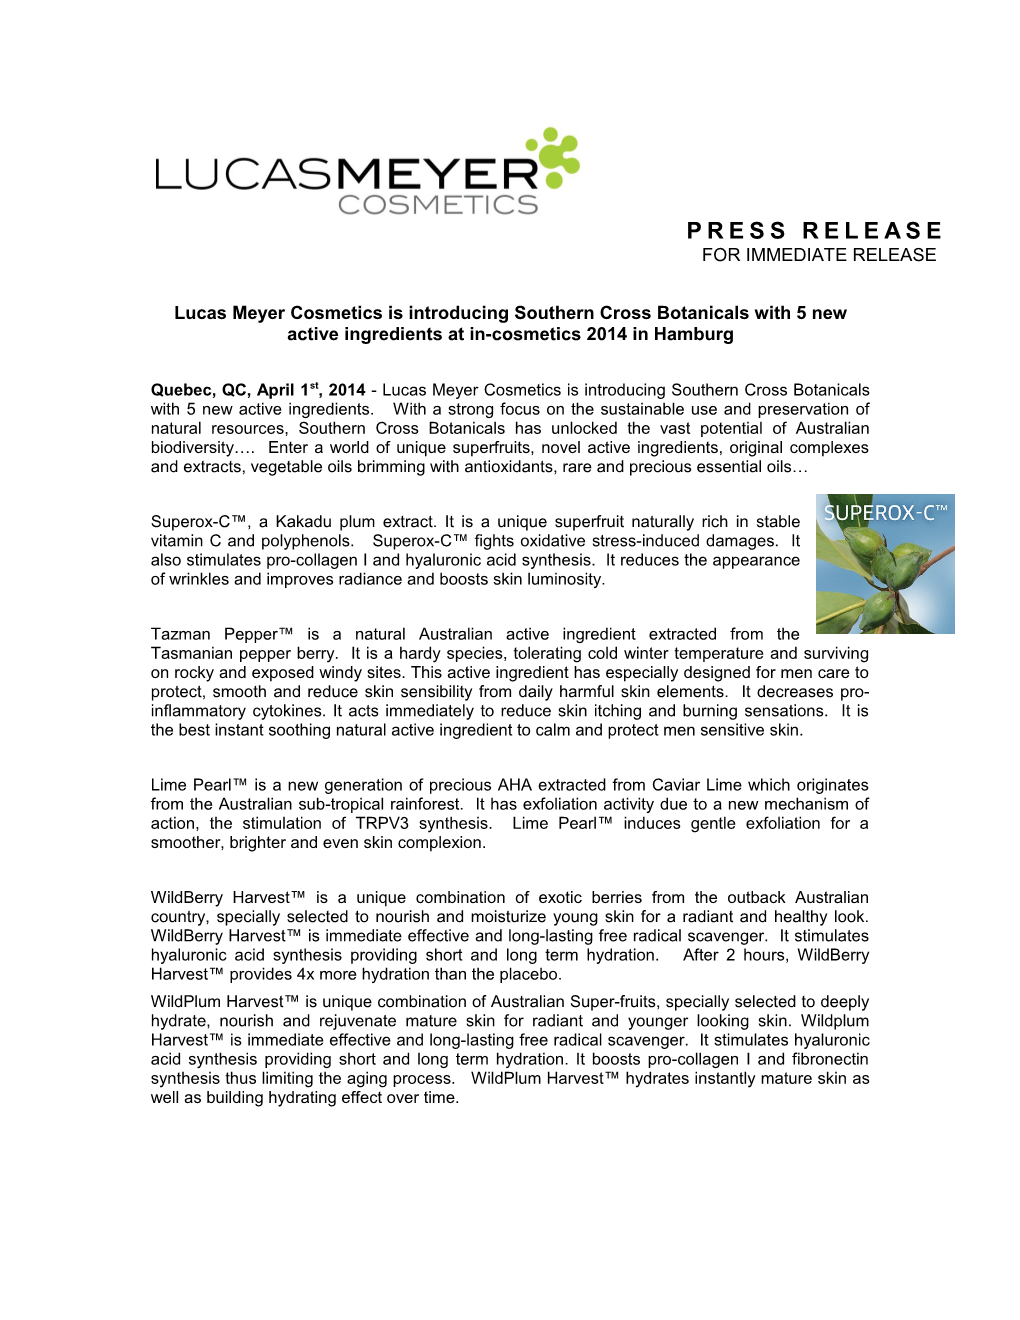 Lucas Meyer Cosmetics Is Introducing Southern Cross Botanicals with 5 New Active Ingredients